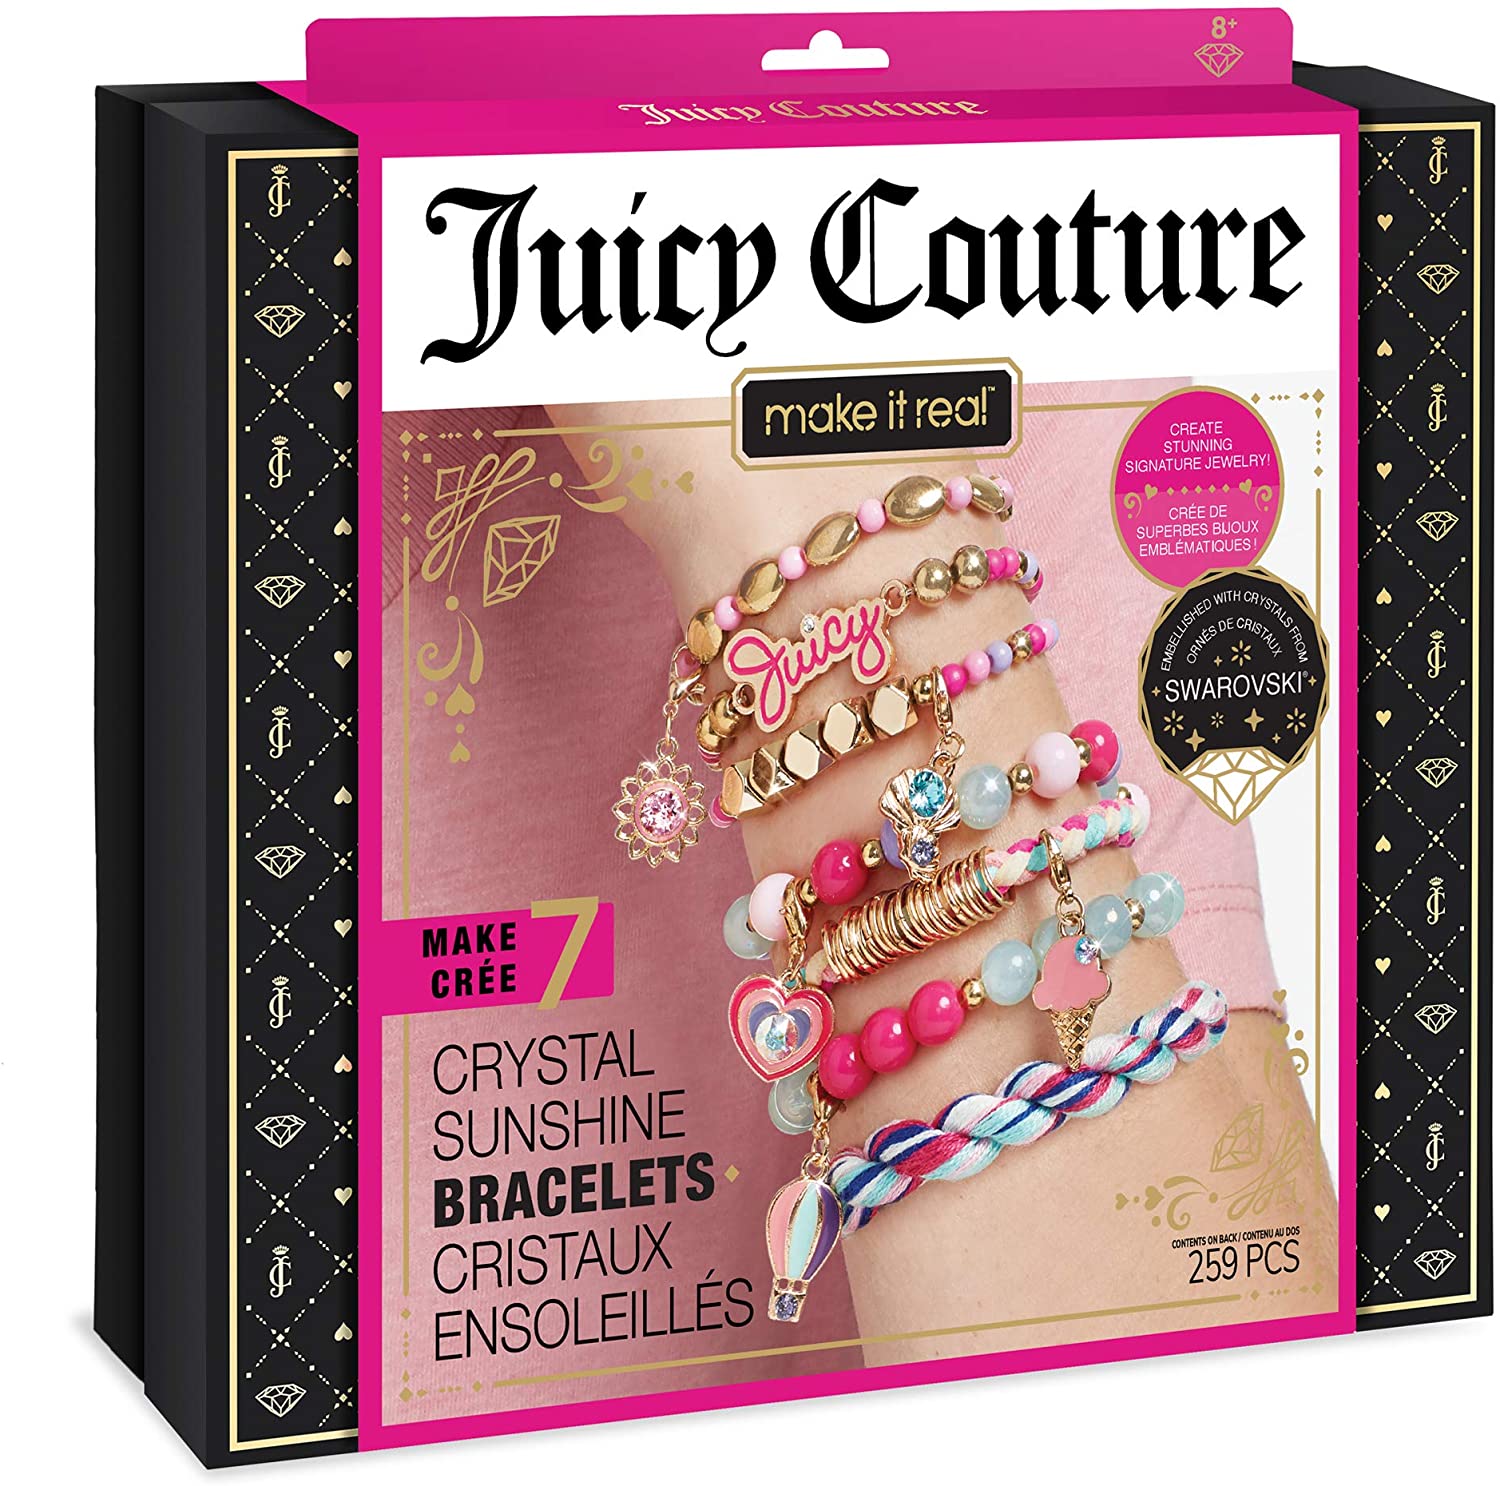 Jewelry Making Kit for Girls Includes 300 Beads | Serabeena